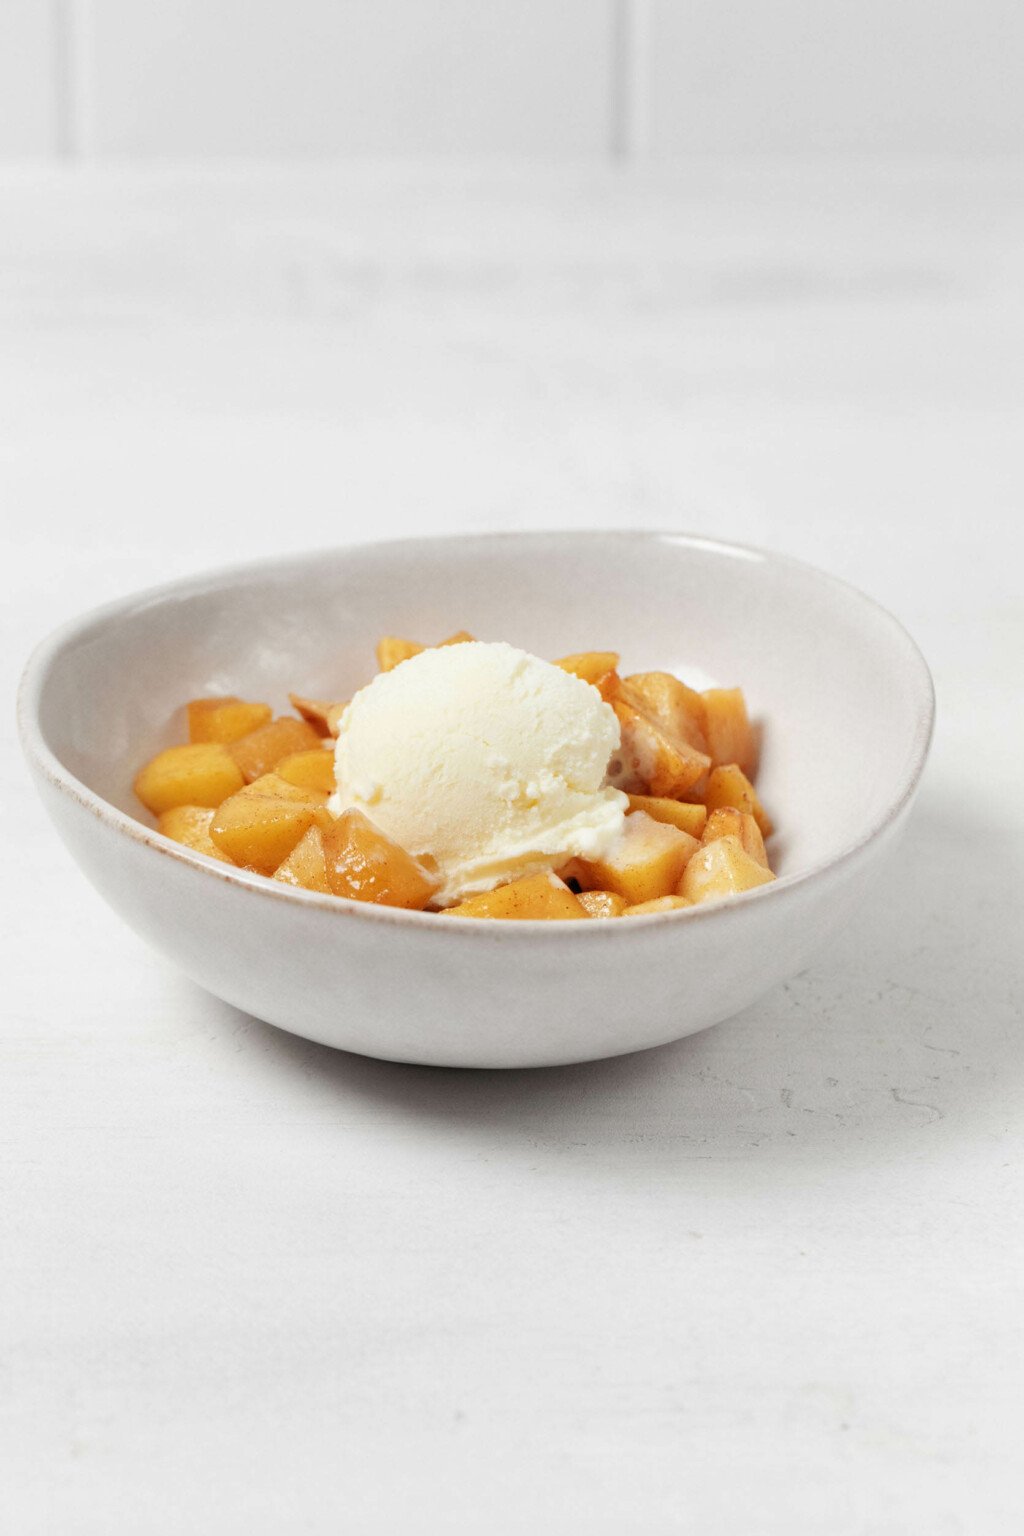 An angled image of a white ceramic bowl of baked apples, topped with a round scoop of vanilla ice cream.